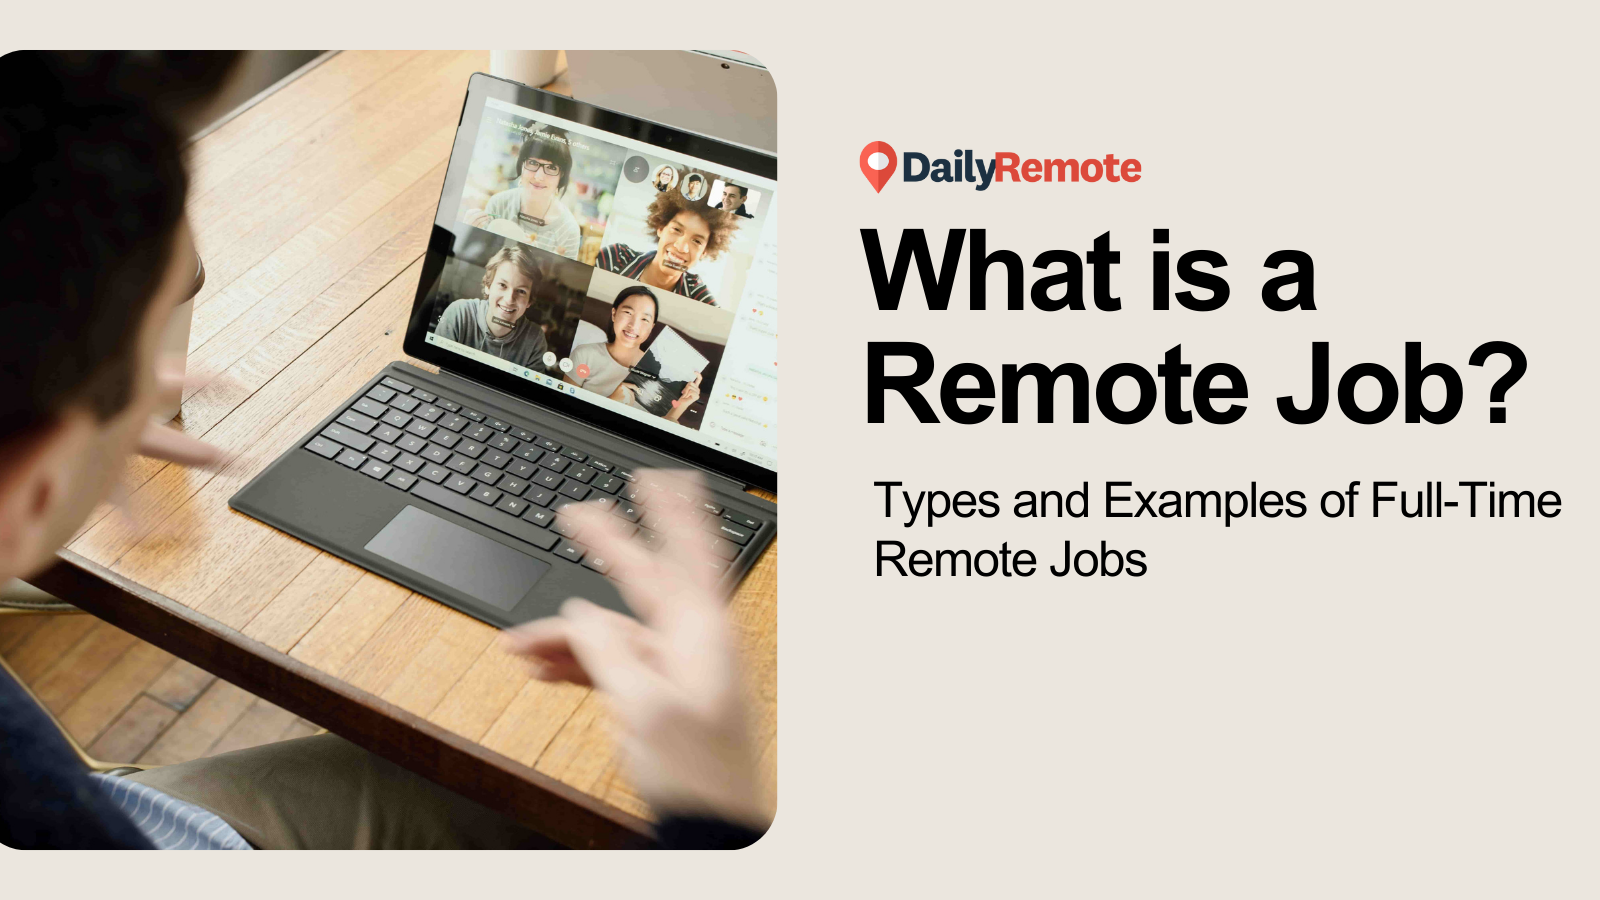 What is a Remote Job? Types and Examples of Full-Time Remote Jobs